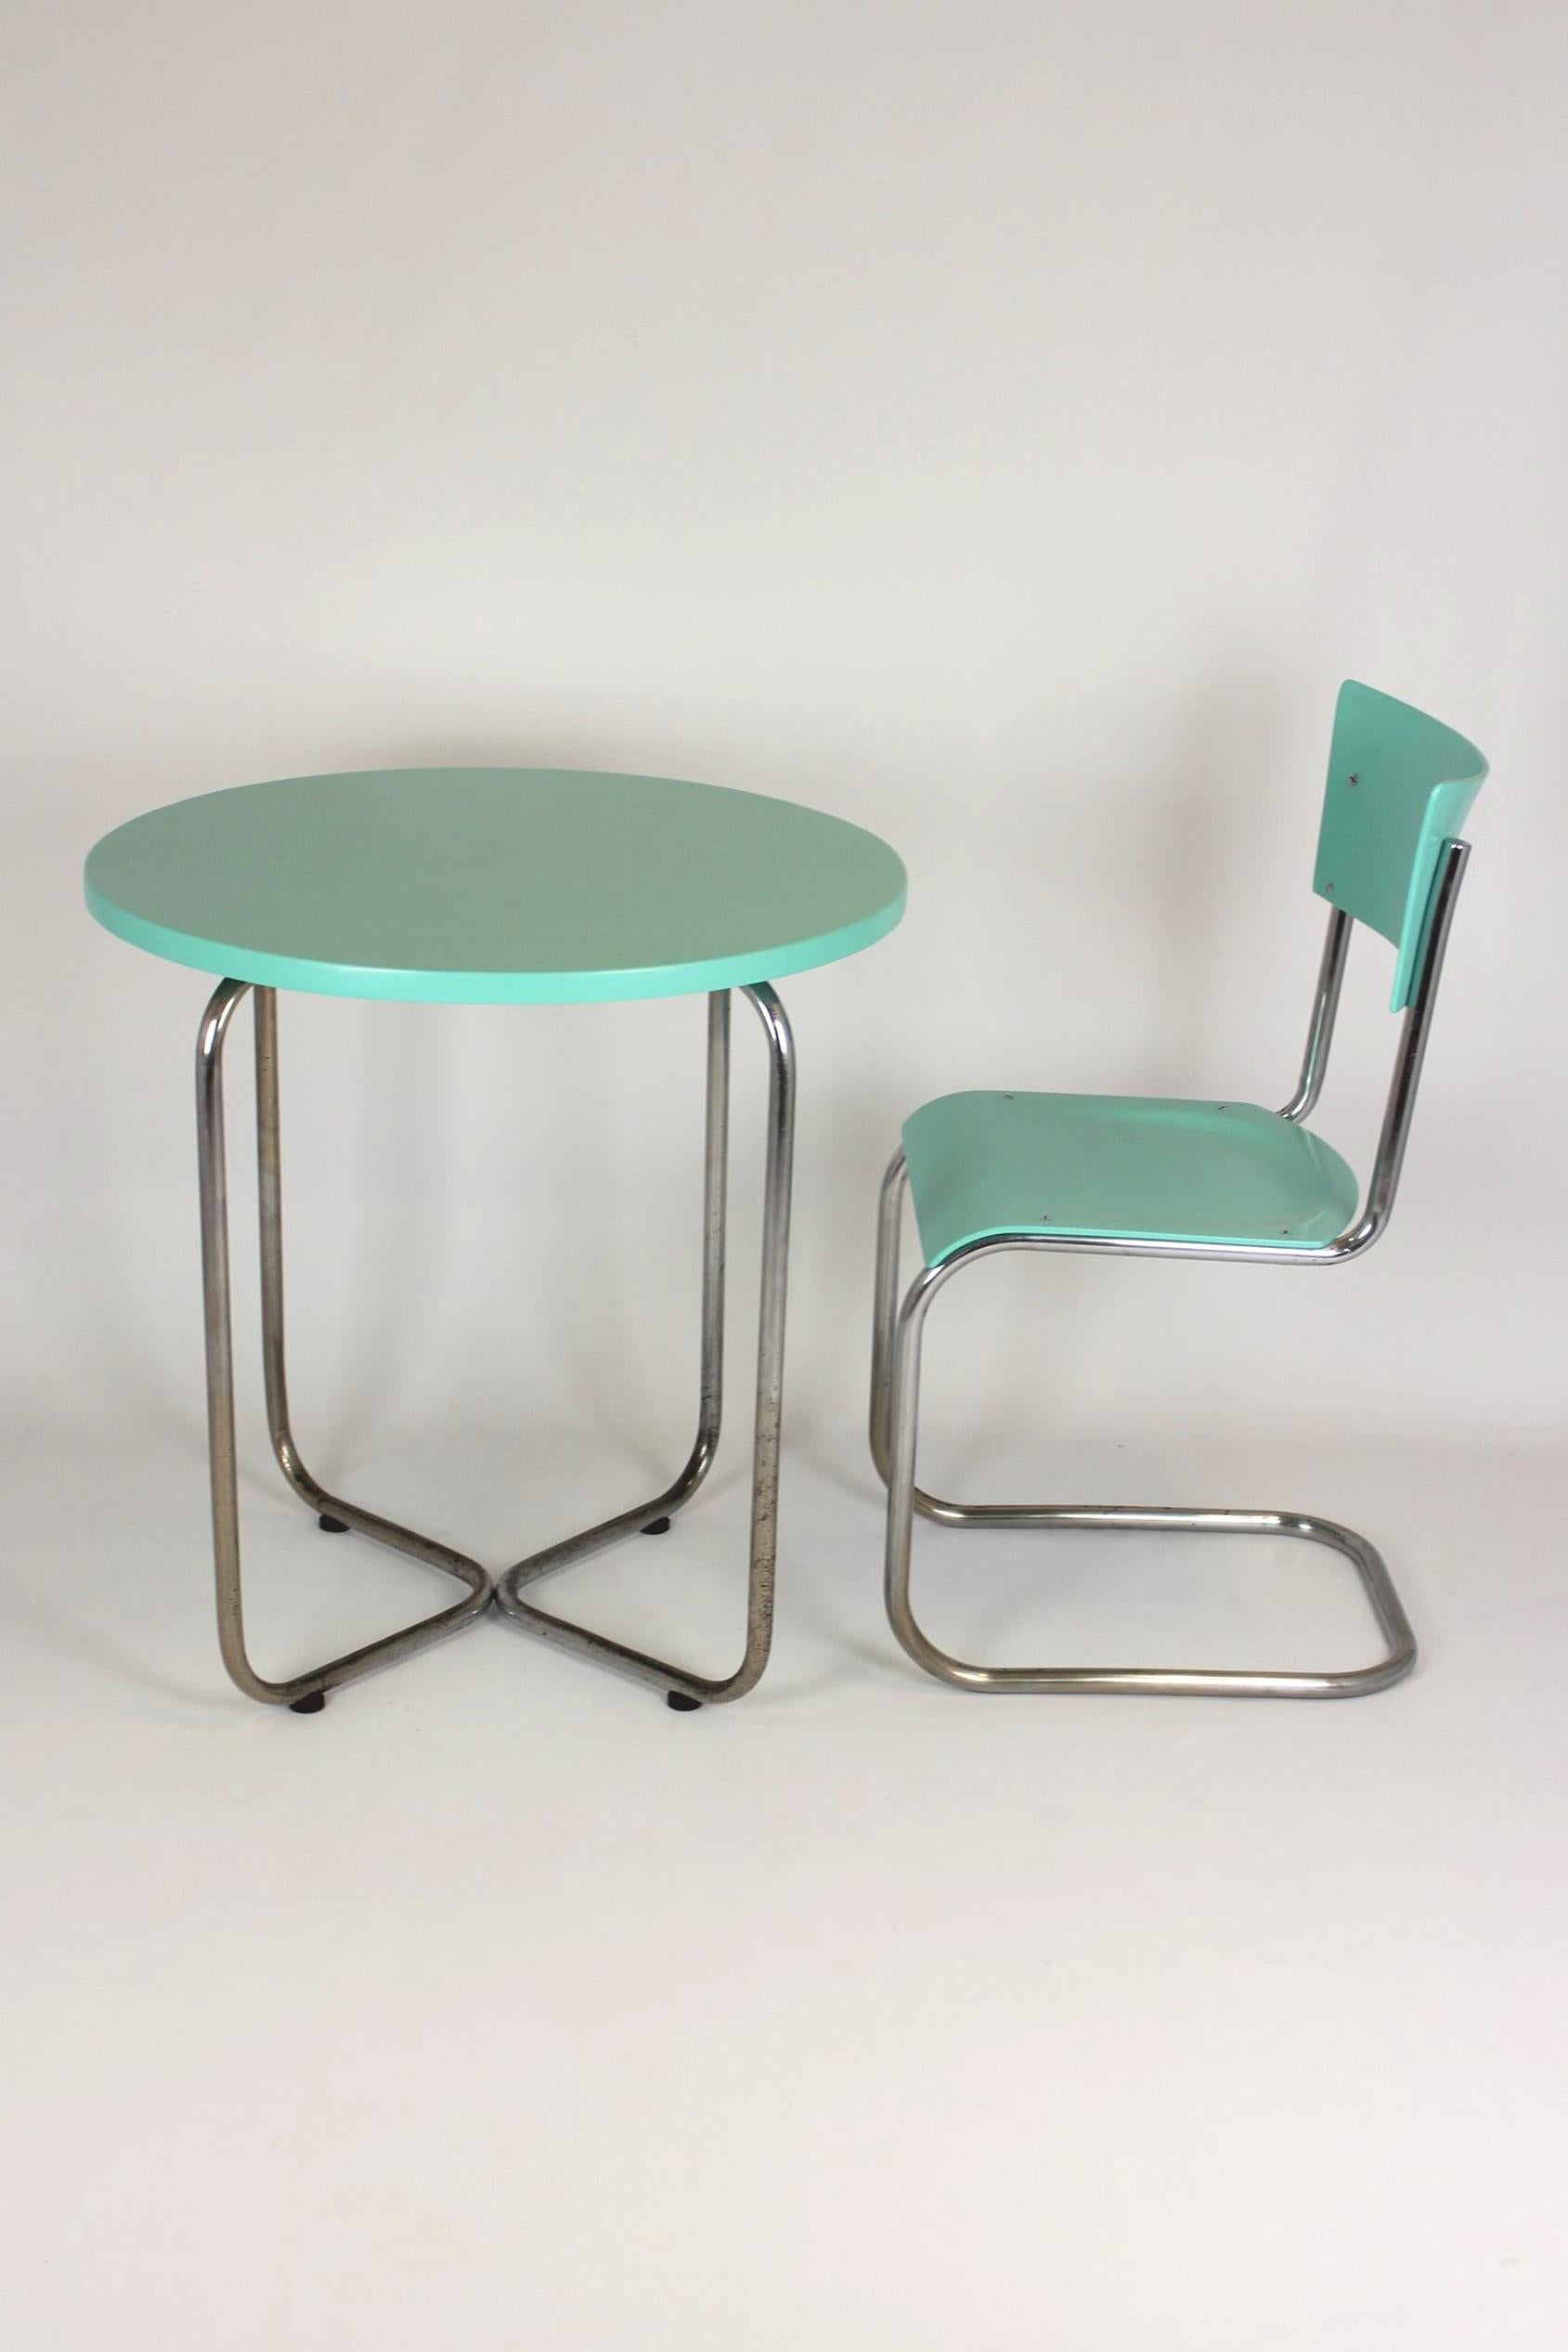 Bauhaus Tubular Steel Set, Round Table and Chair by Mart Stam, 1930s For Sale 6